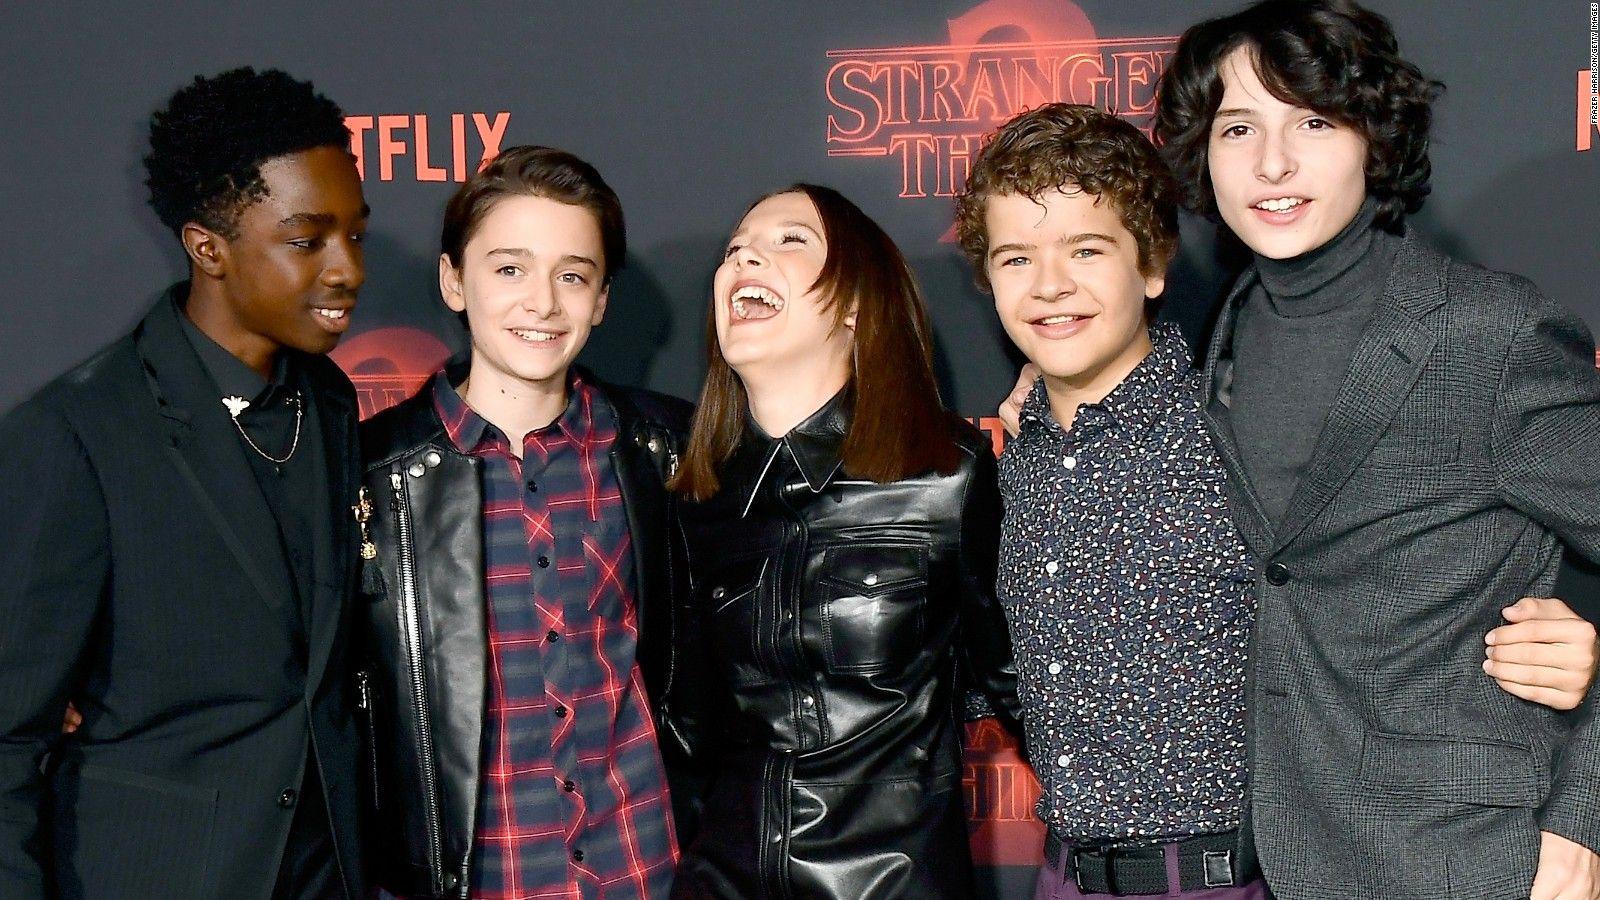 Stranger Things' Season 3 is Officially in Production